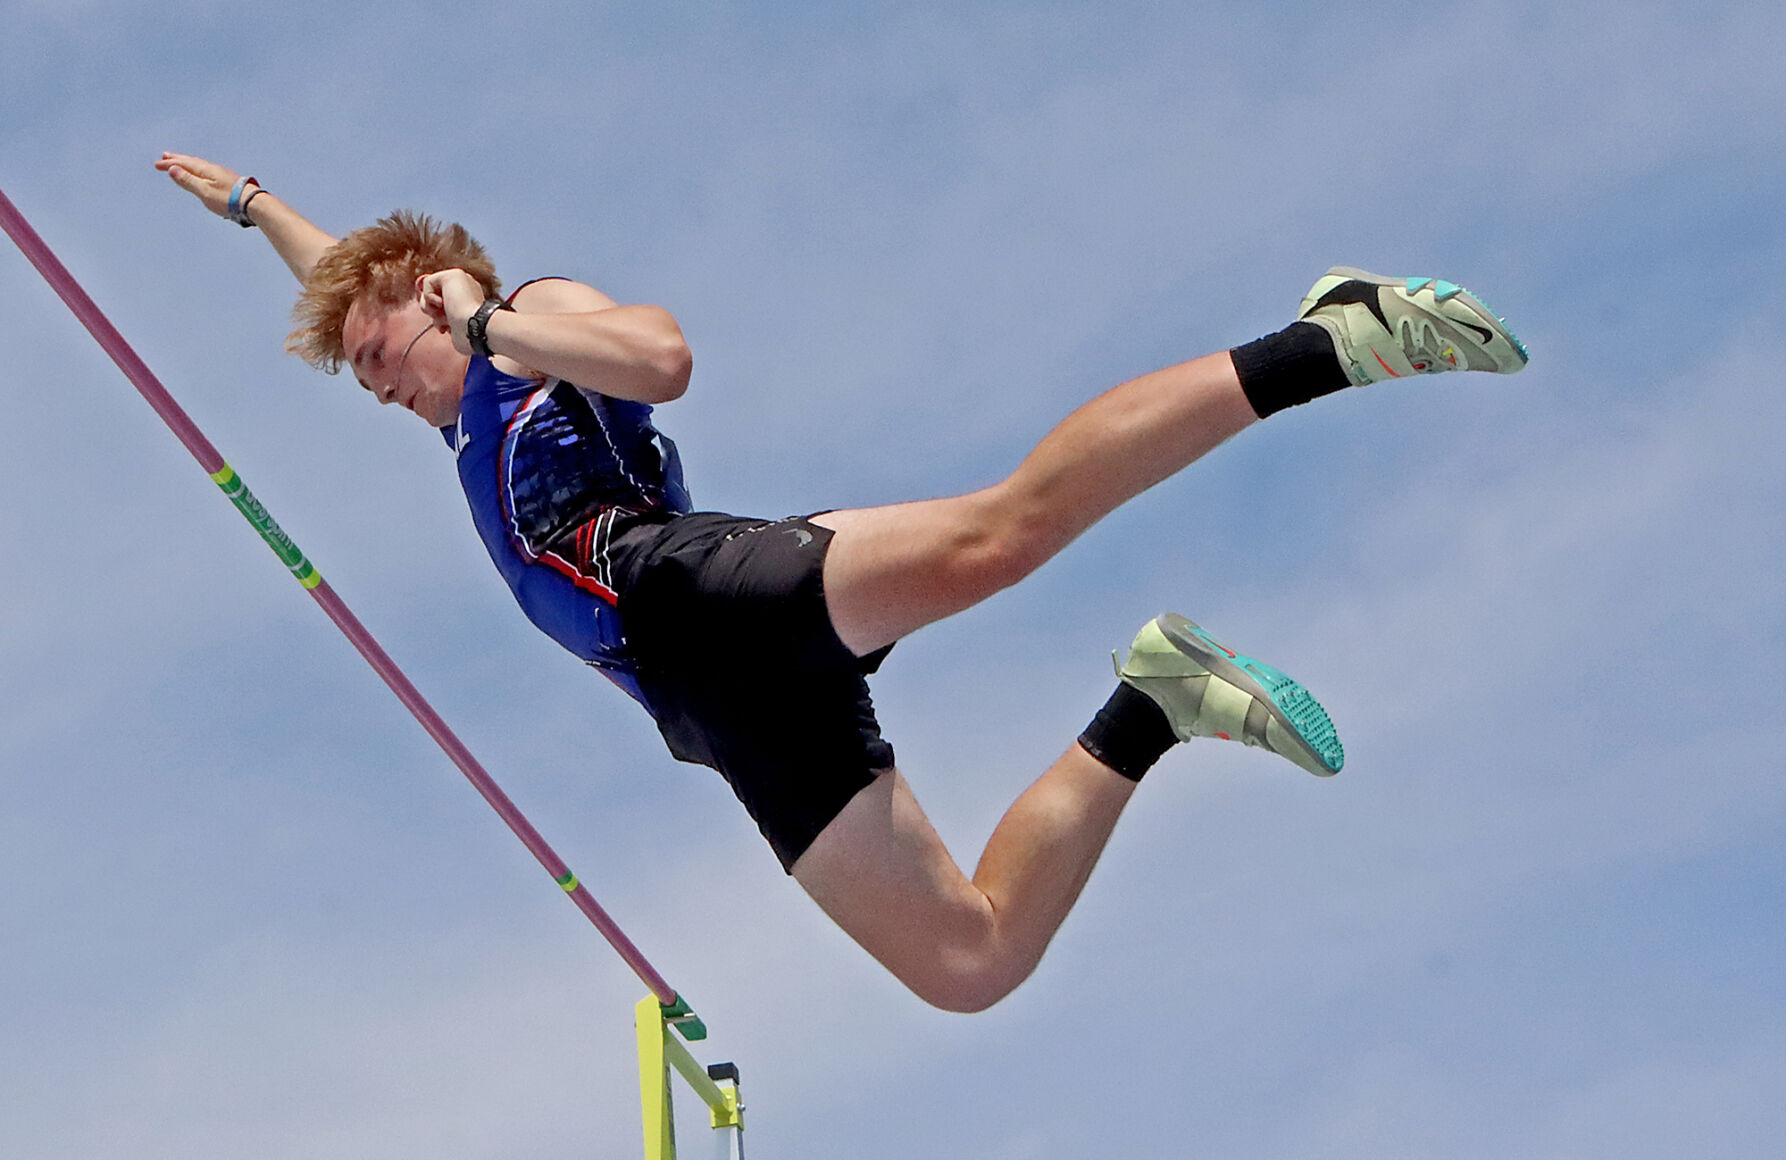 Madison Central’s Jordan Bryner Clinches 4th Consecutive Pole Vault State Title in High School Track Championships